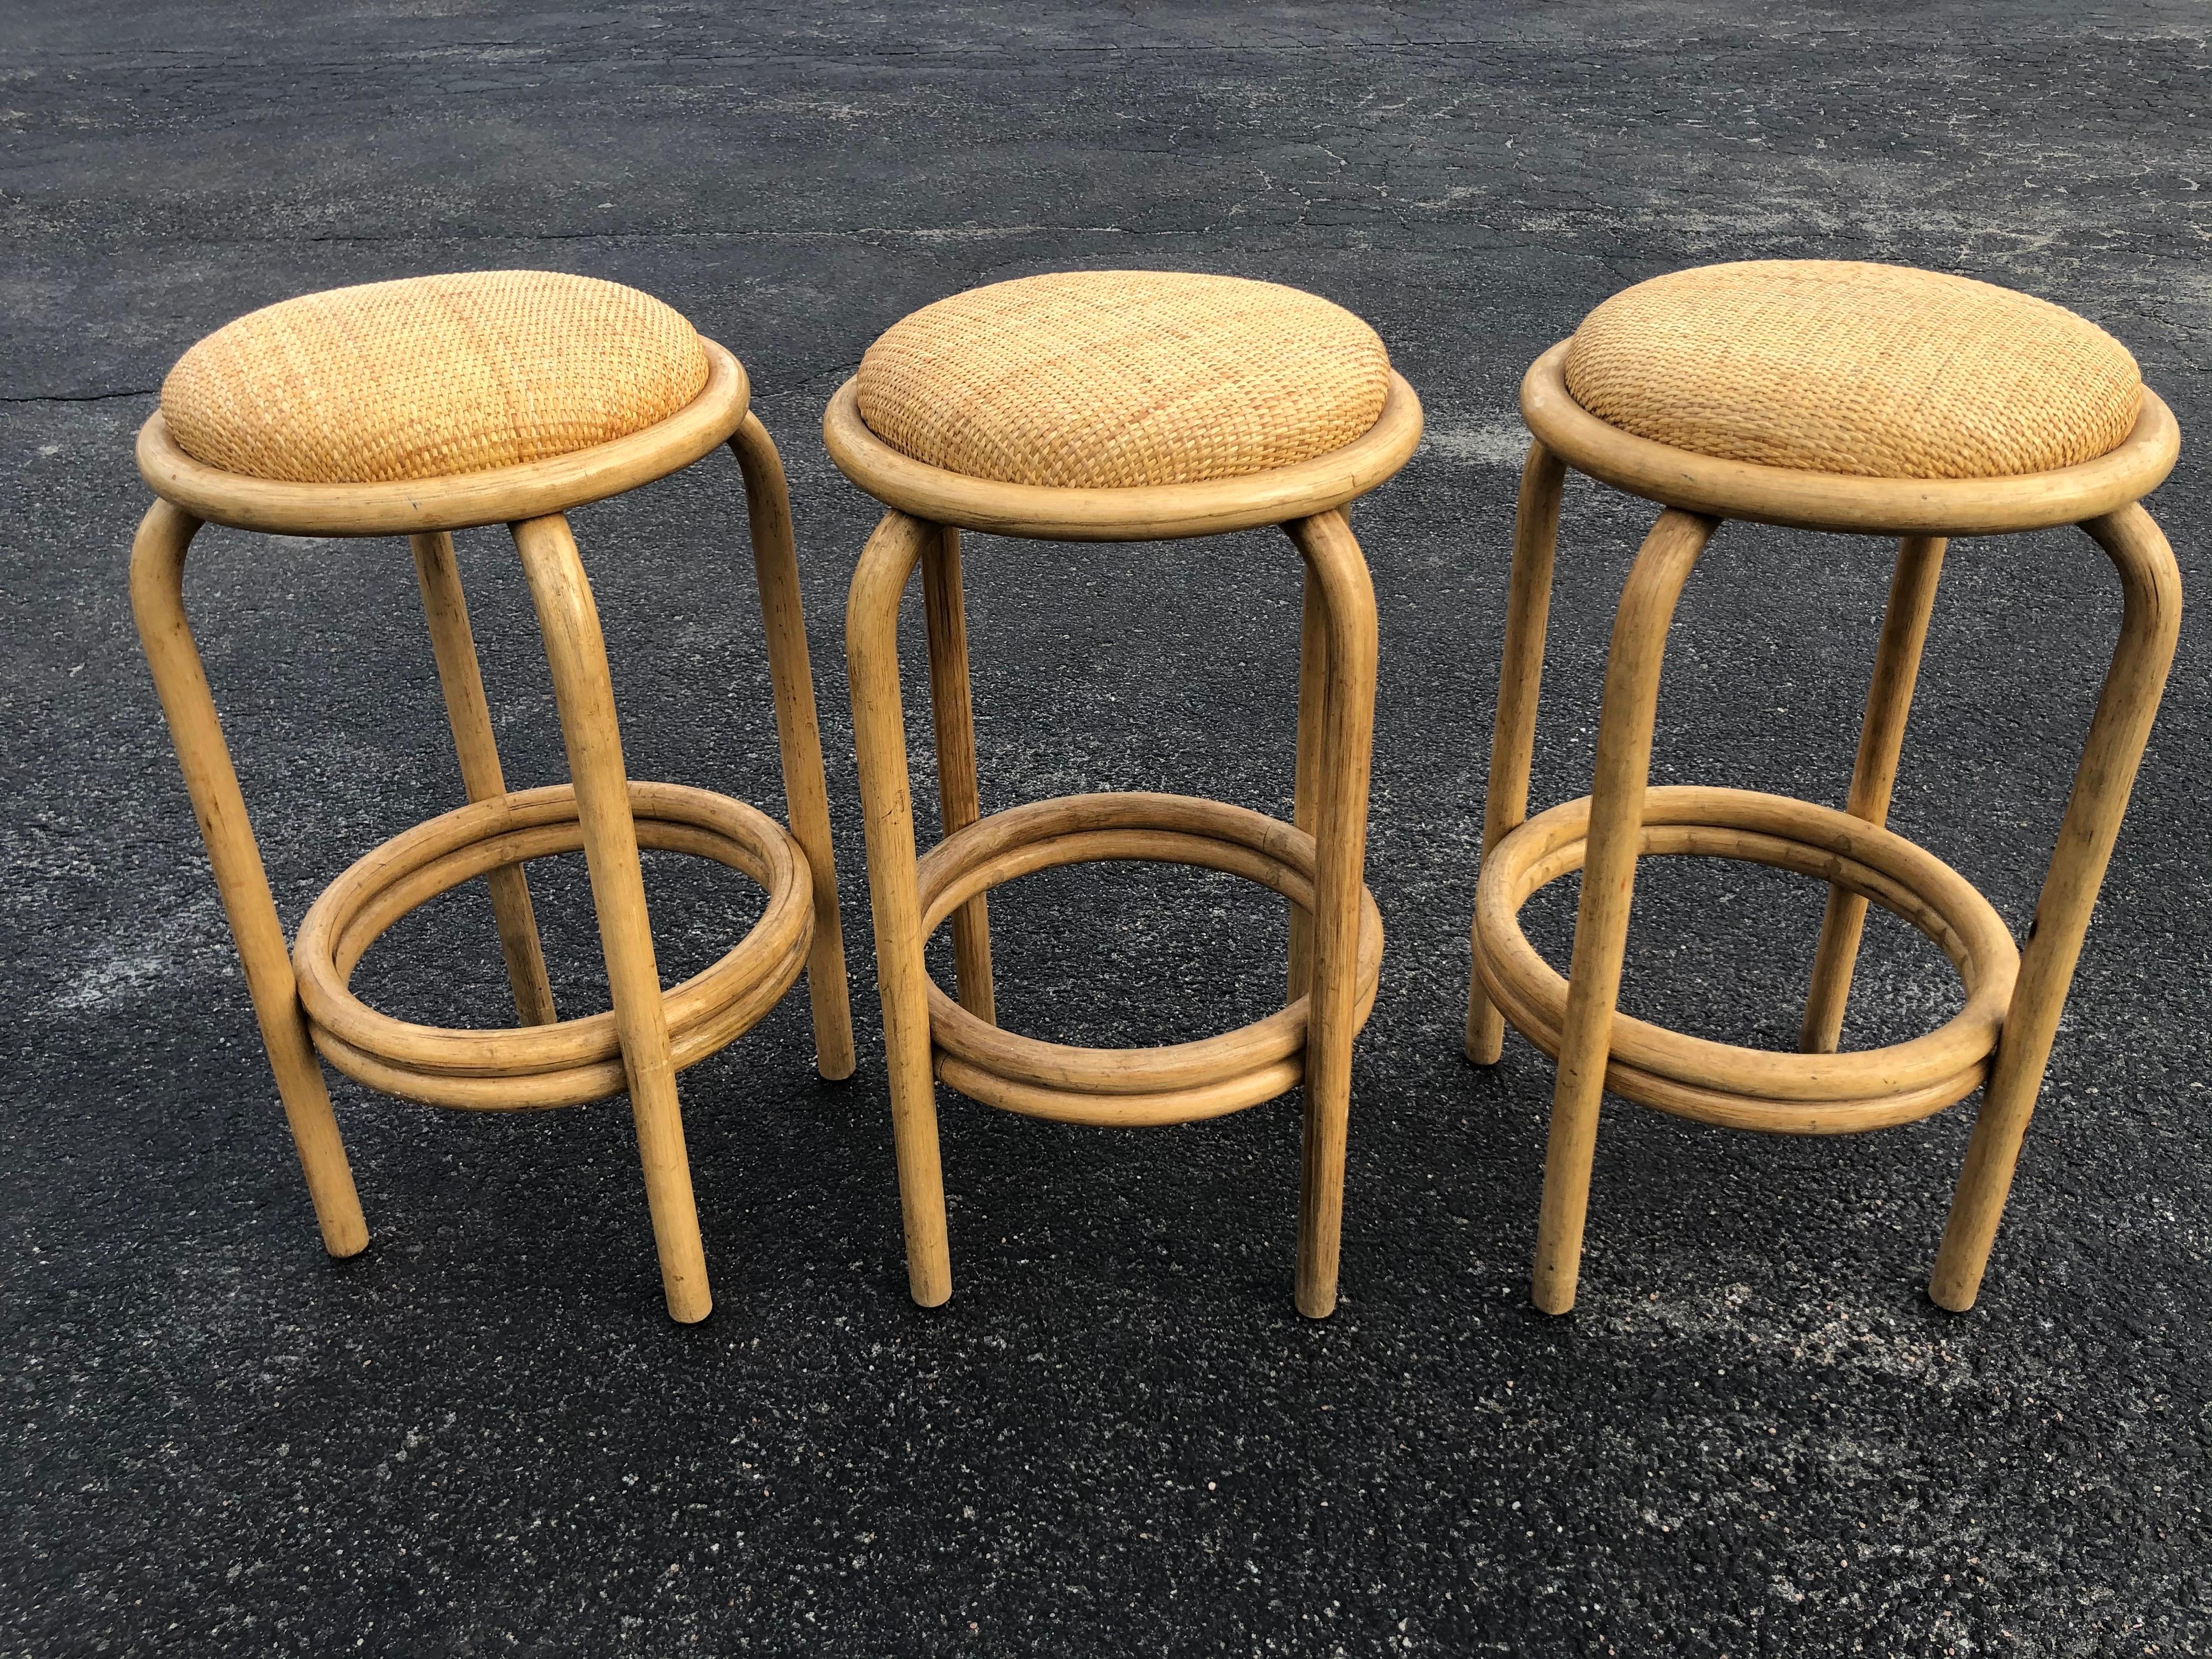 Set of Paul Frankl style rattan bar or counter stools. Classic timeless stools with a natural wicker rounded seat cushion. The set includes three stools.